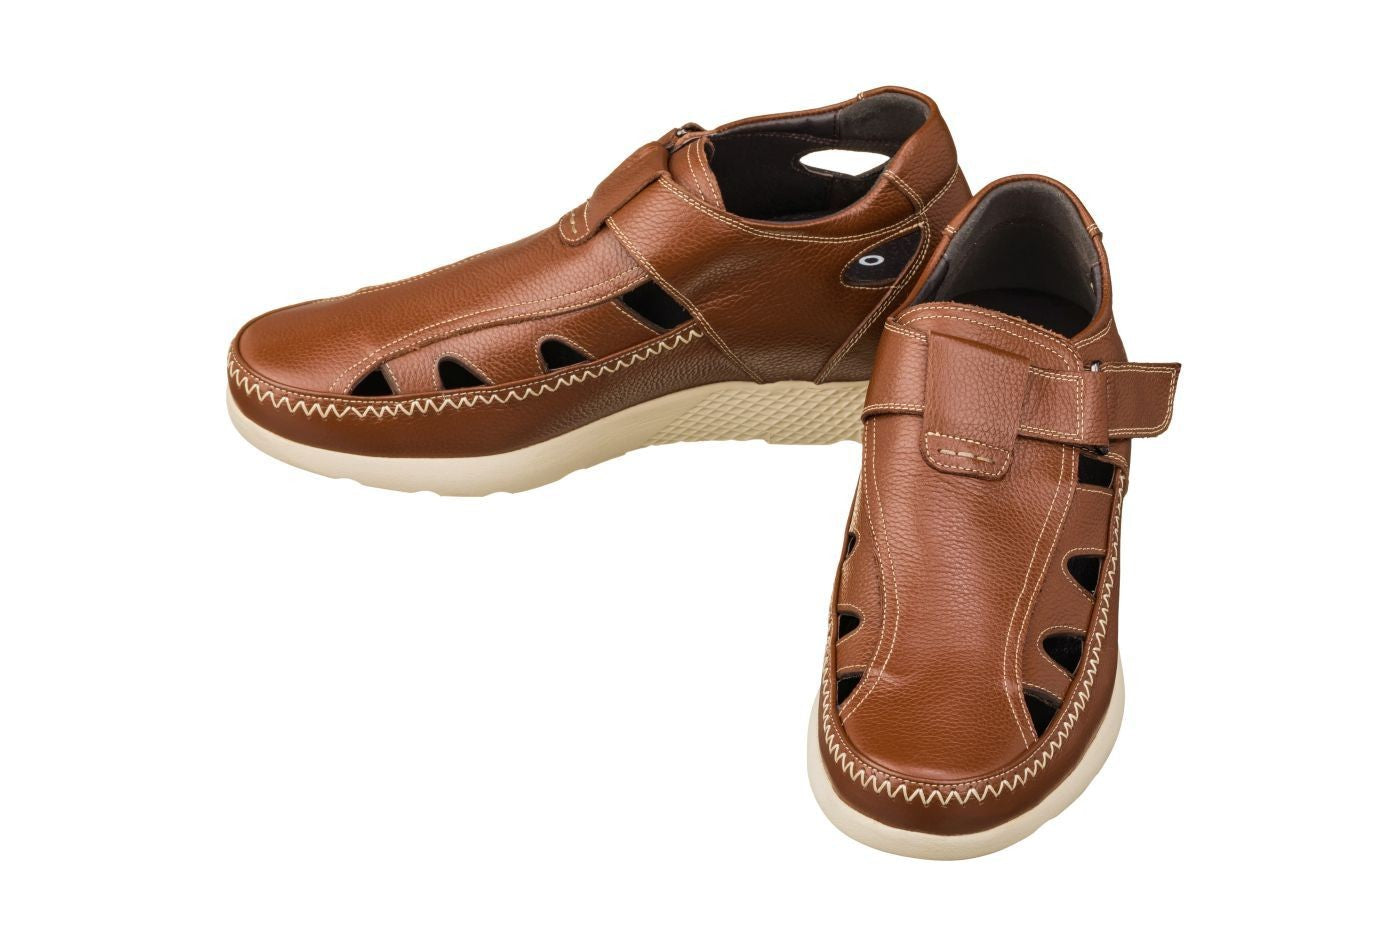 Elevator shoes height increase CALTO - K2133 - 2.8 Inches Taller (Brown) - Fisherman Sandal Lightweight